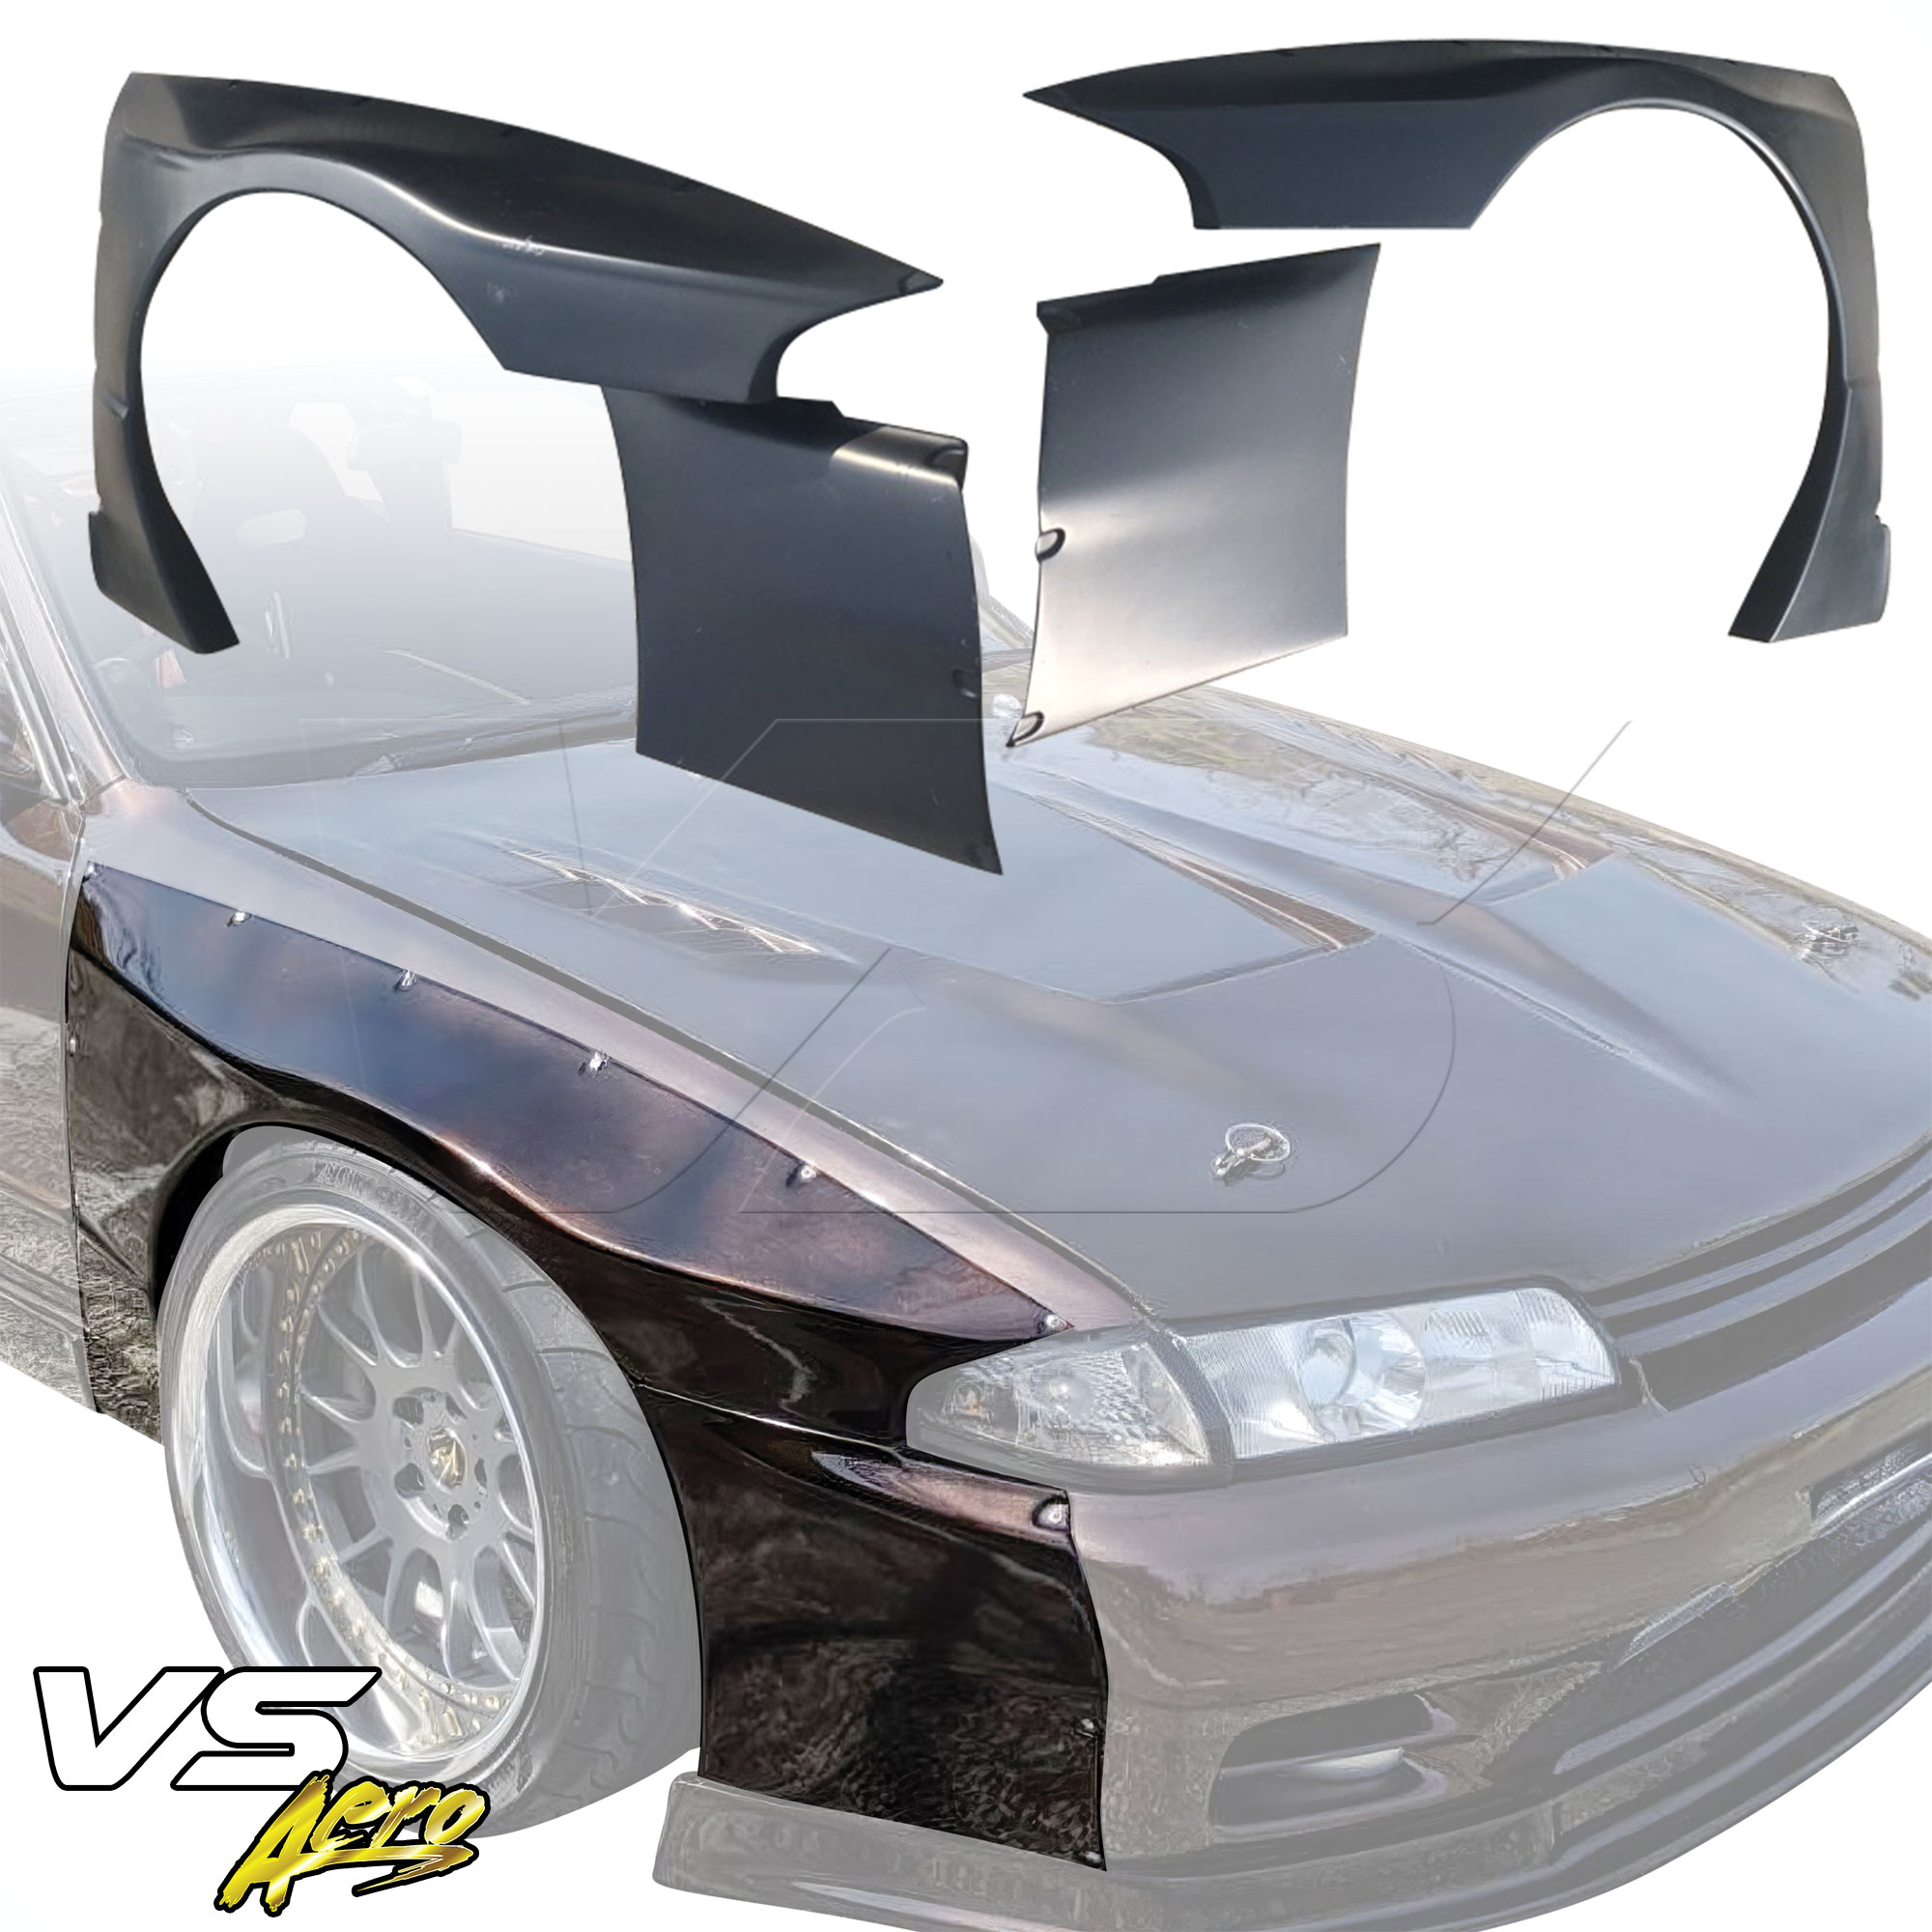 VSaero FRP TKYO Wide Body 40mm Fender Flares (front) 4pc > Nissan Skyline R32 1990-1994 > 2dr Coupe - Image 8